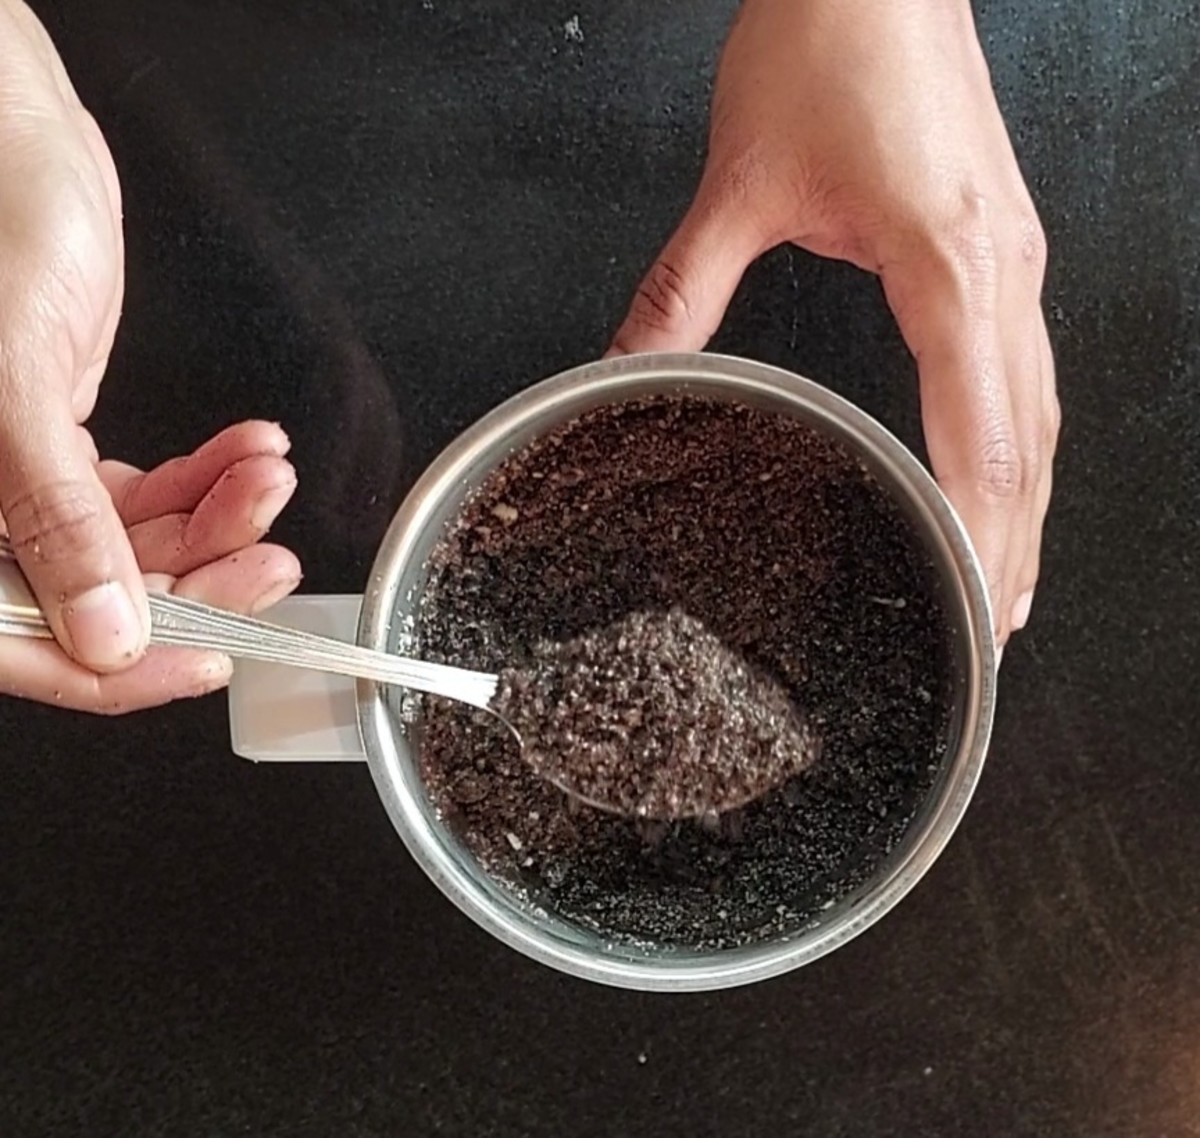 Close the lid and pulse it once (do not grind to a fine powder).